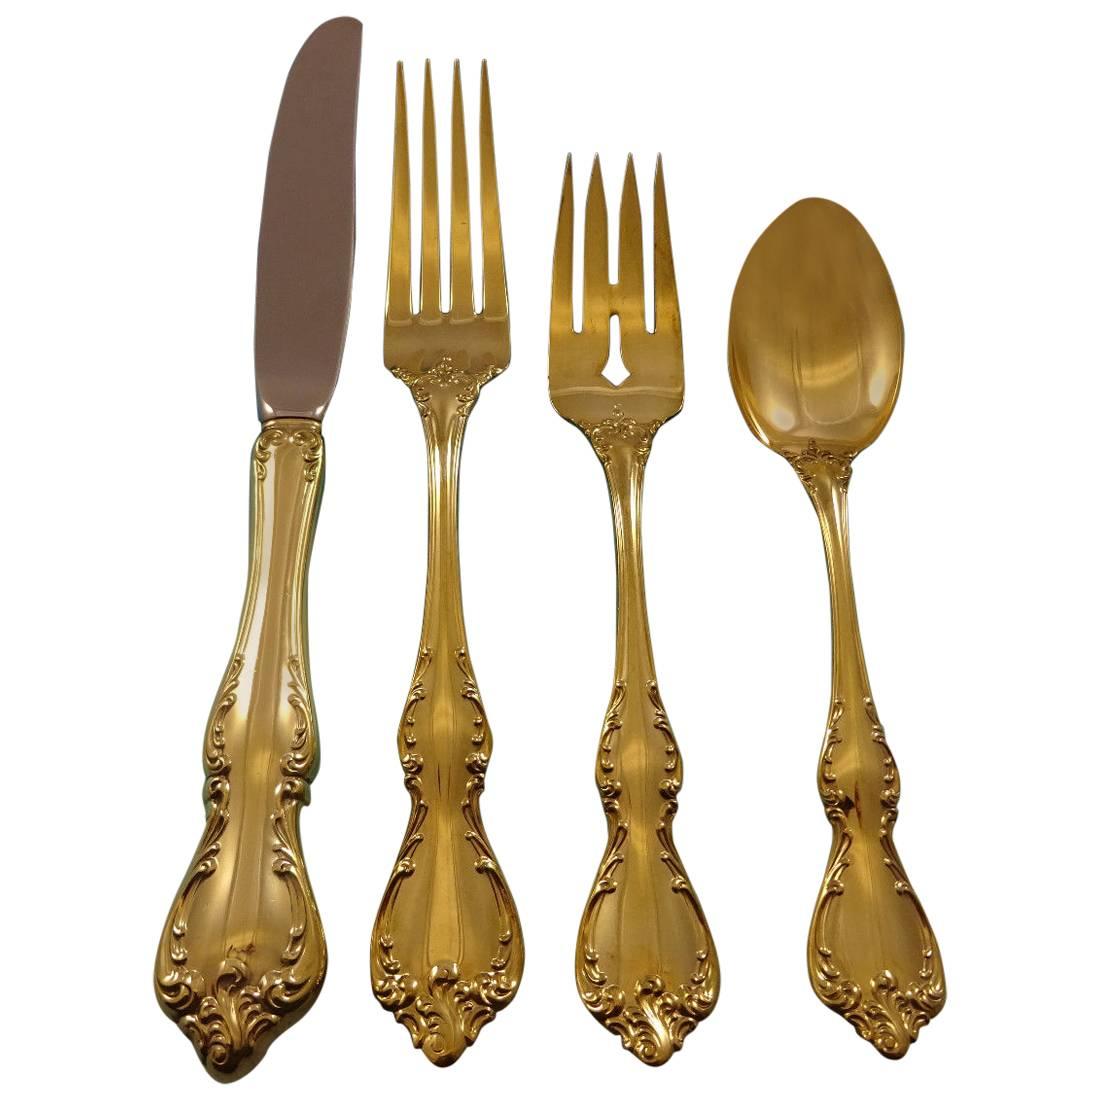 Debussy by Towle Sterling Silver Flatware Service for 12, Set in Vermeil Gold For Sale